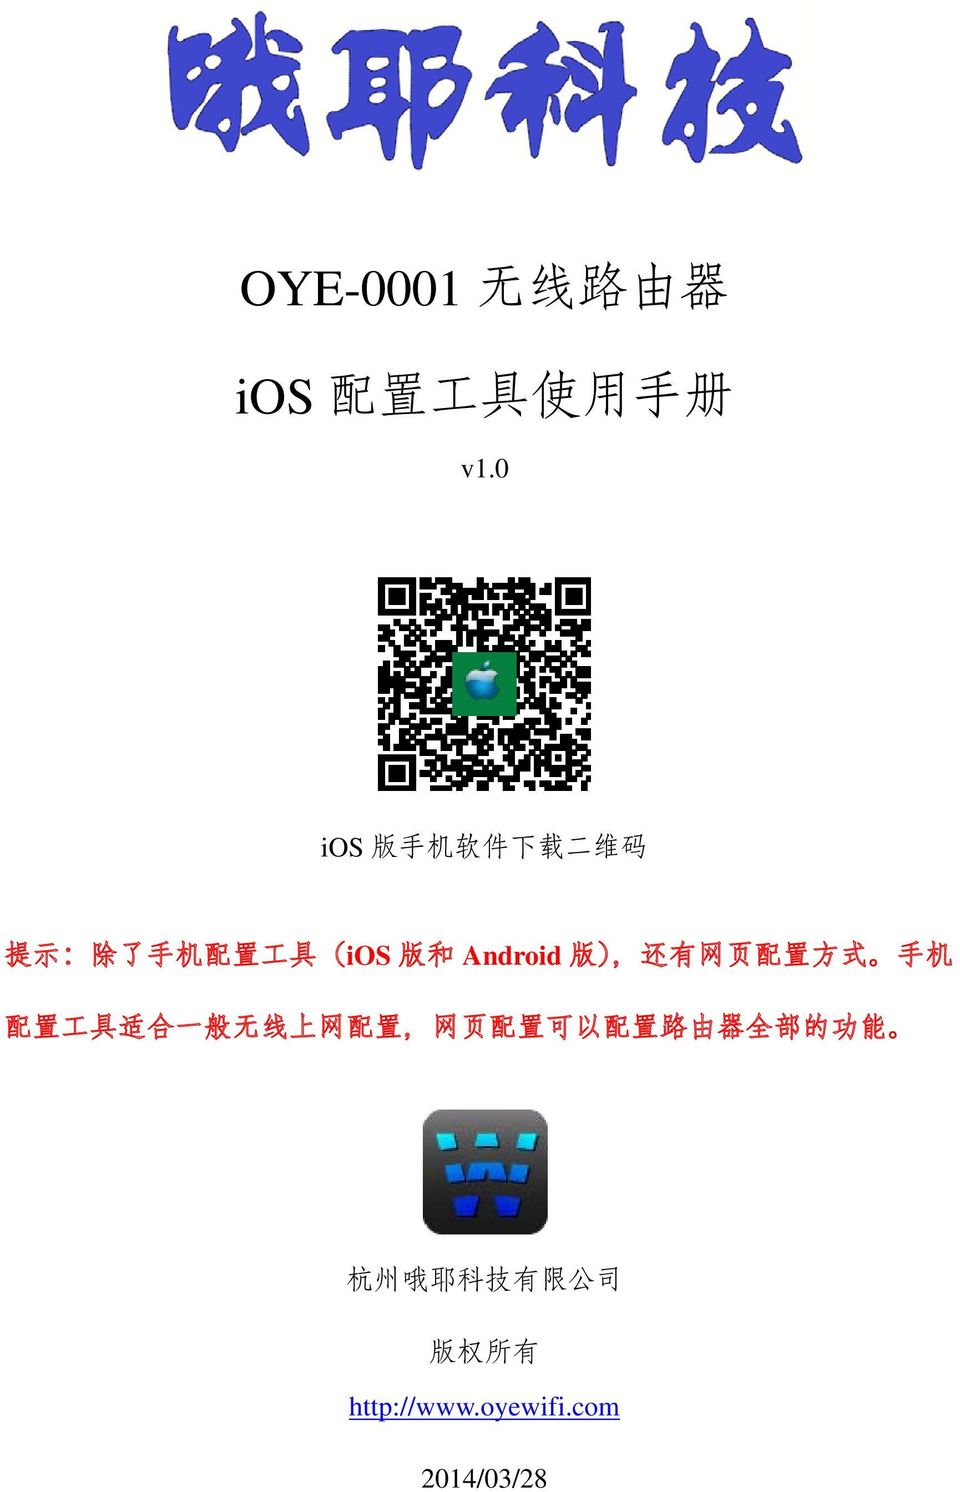 Android 版 ), 还 有 网 页 配 置 方 式 手 机 配 置 工 具 适 合 一 般 无 线 上 网 配 置, 网